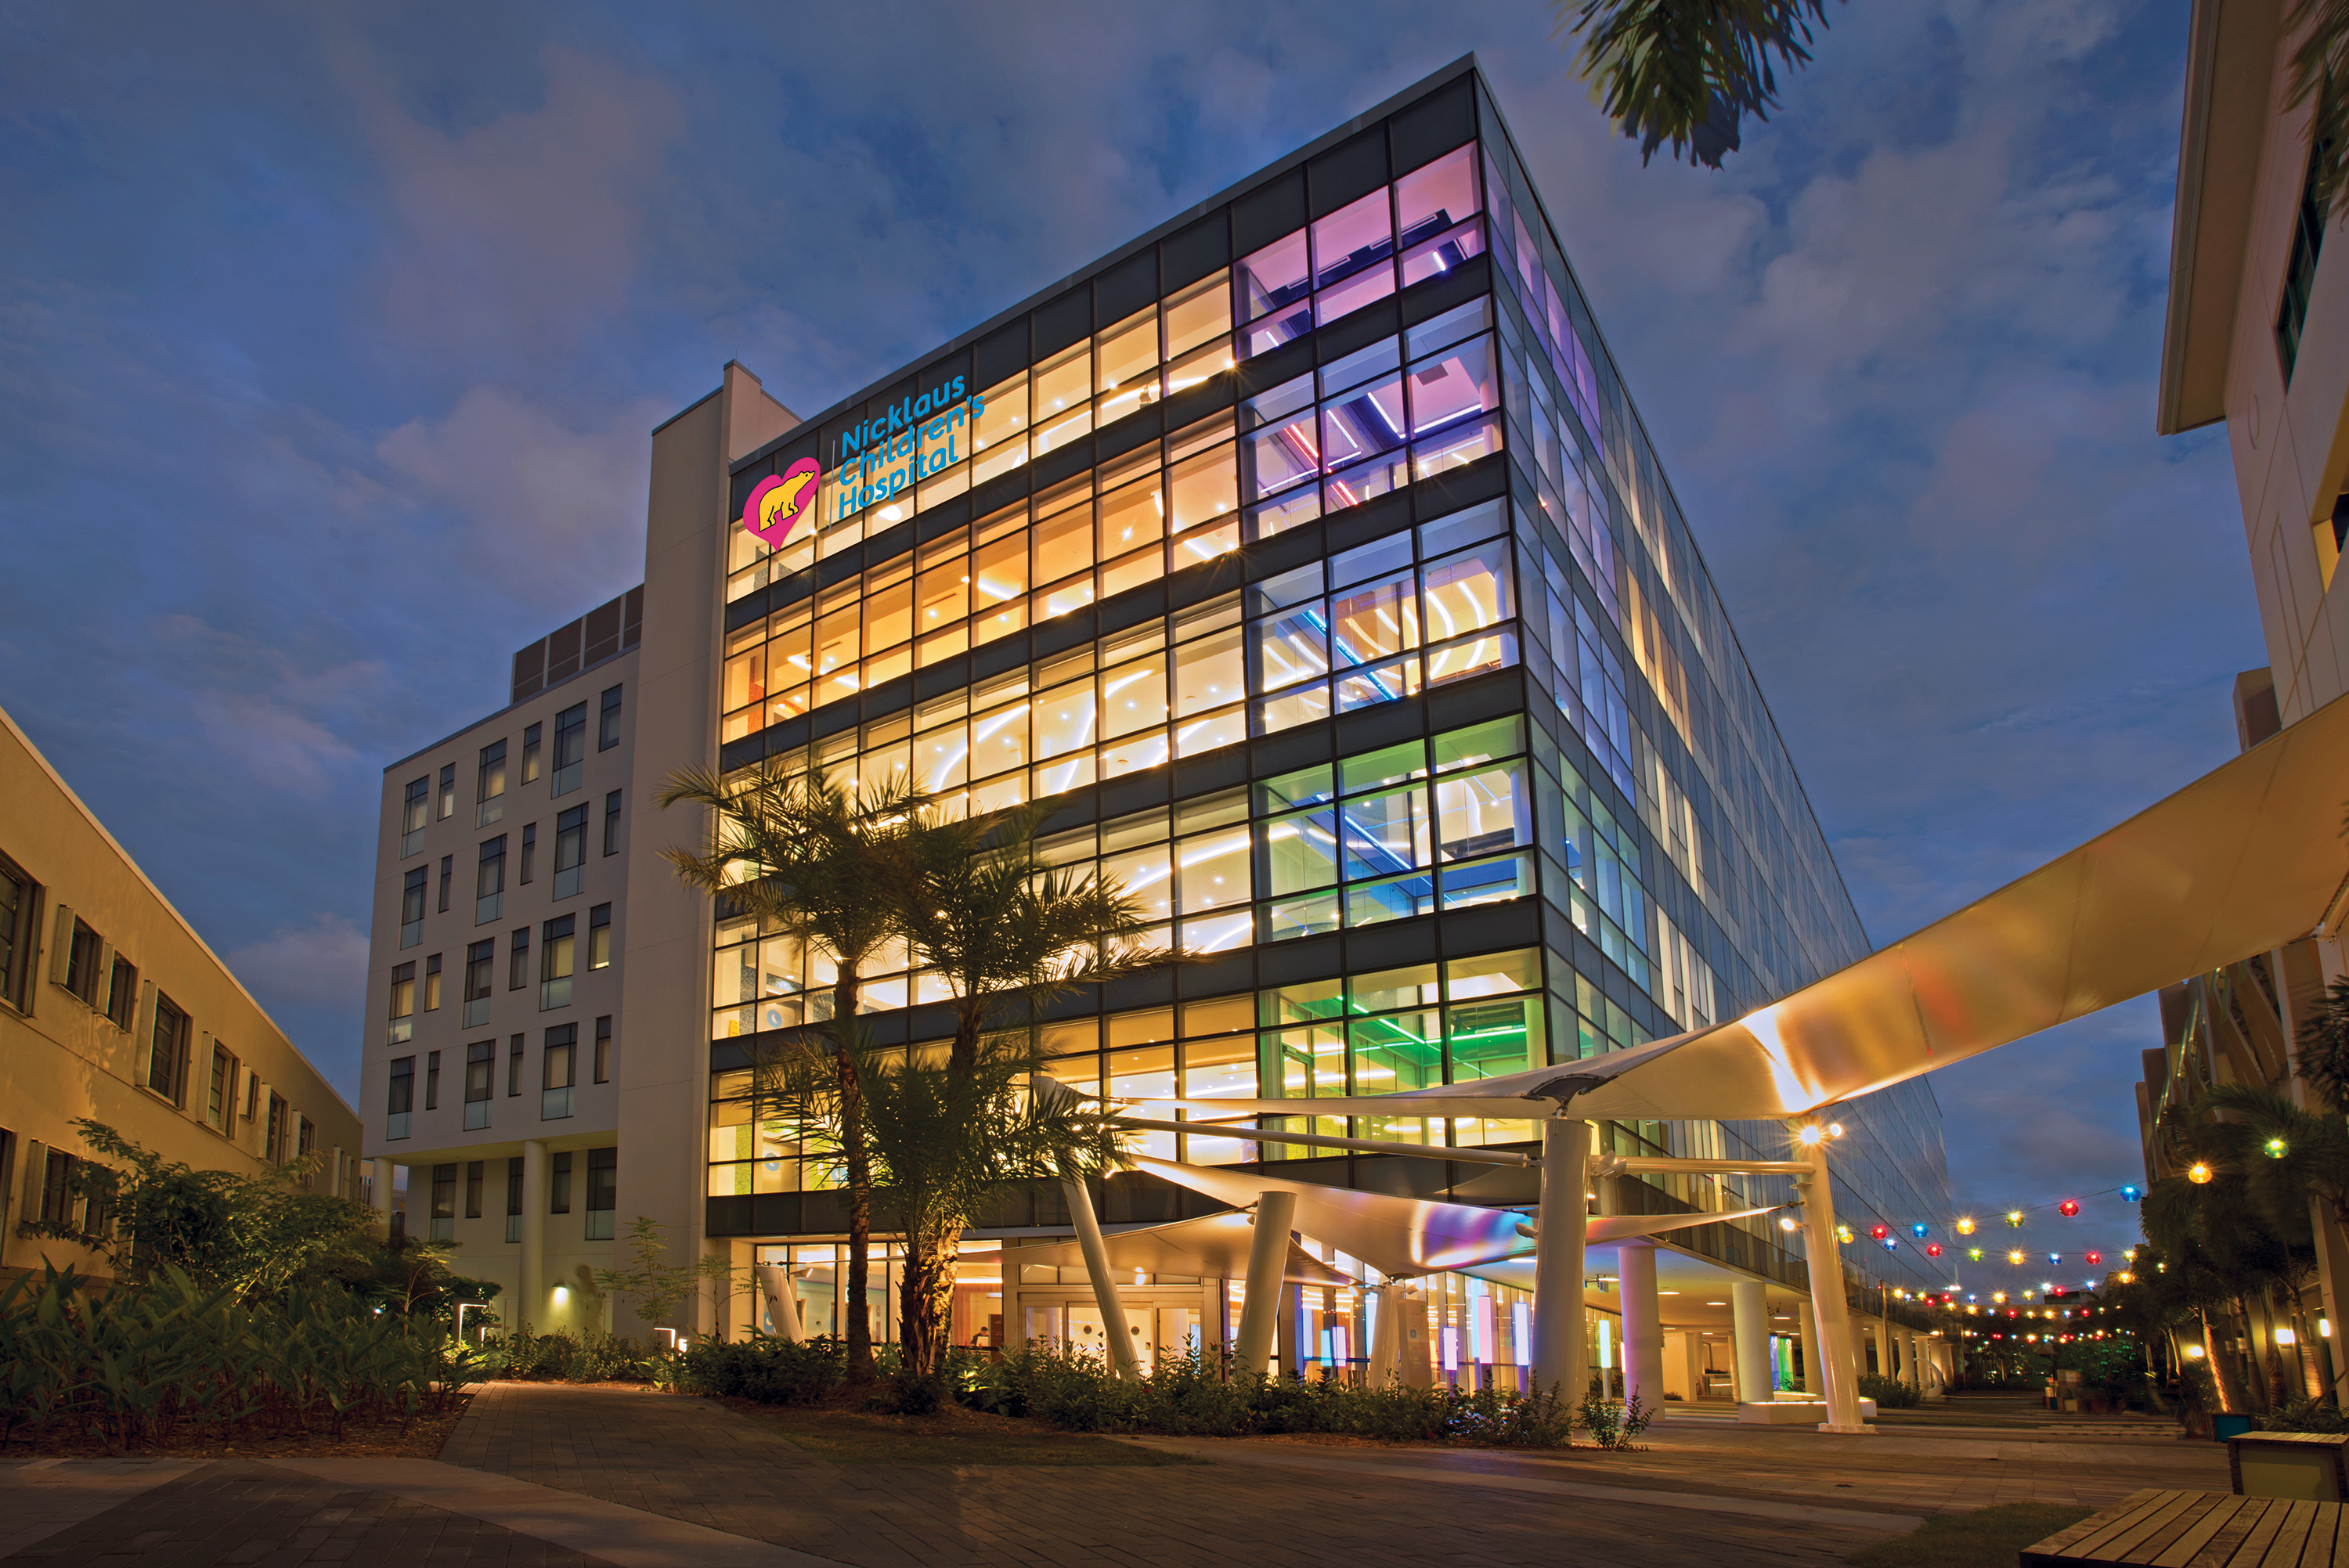 A photo of the Nicklaus Children's Hospital building in Miami, Florida.